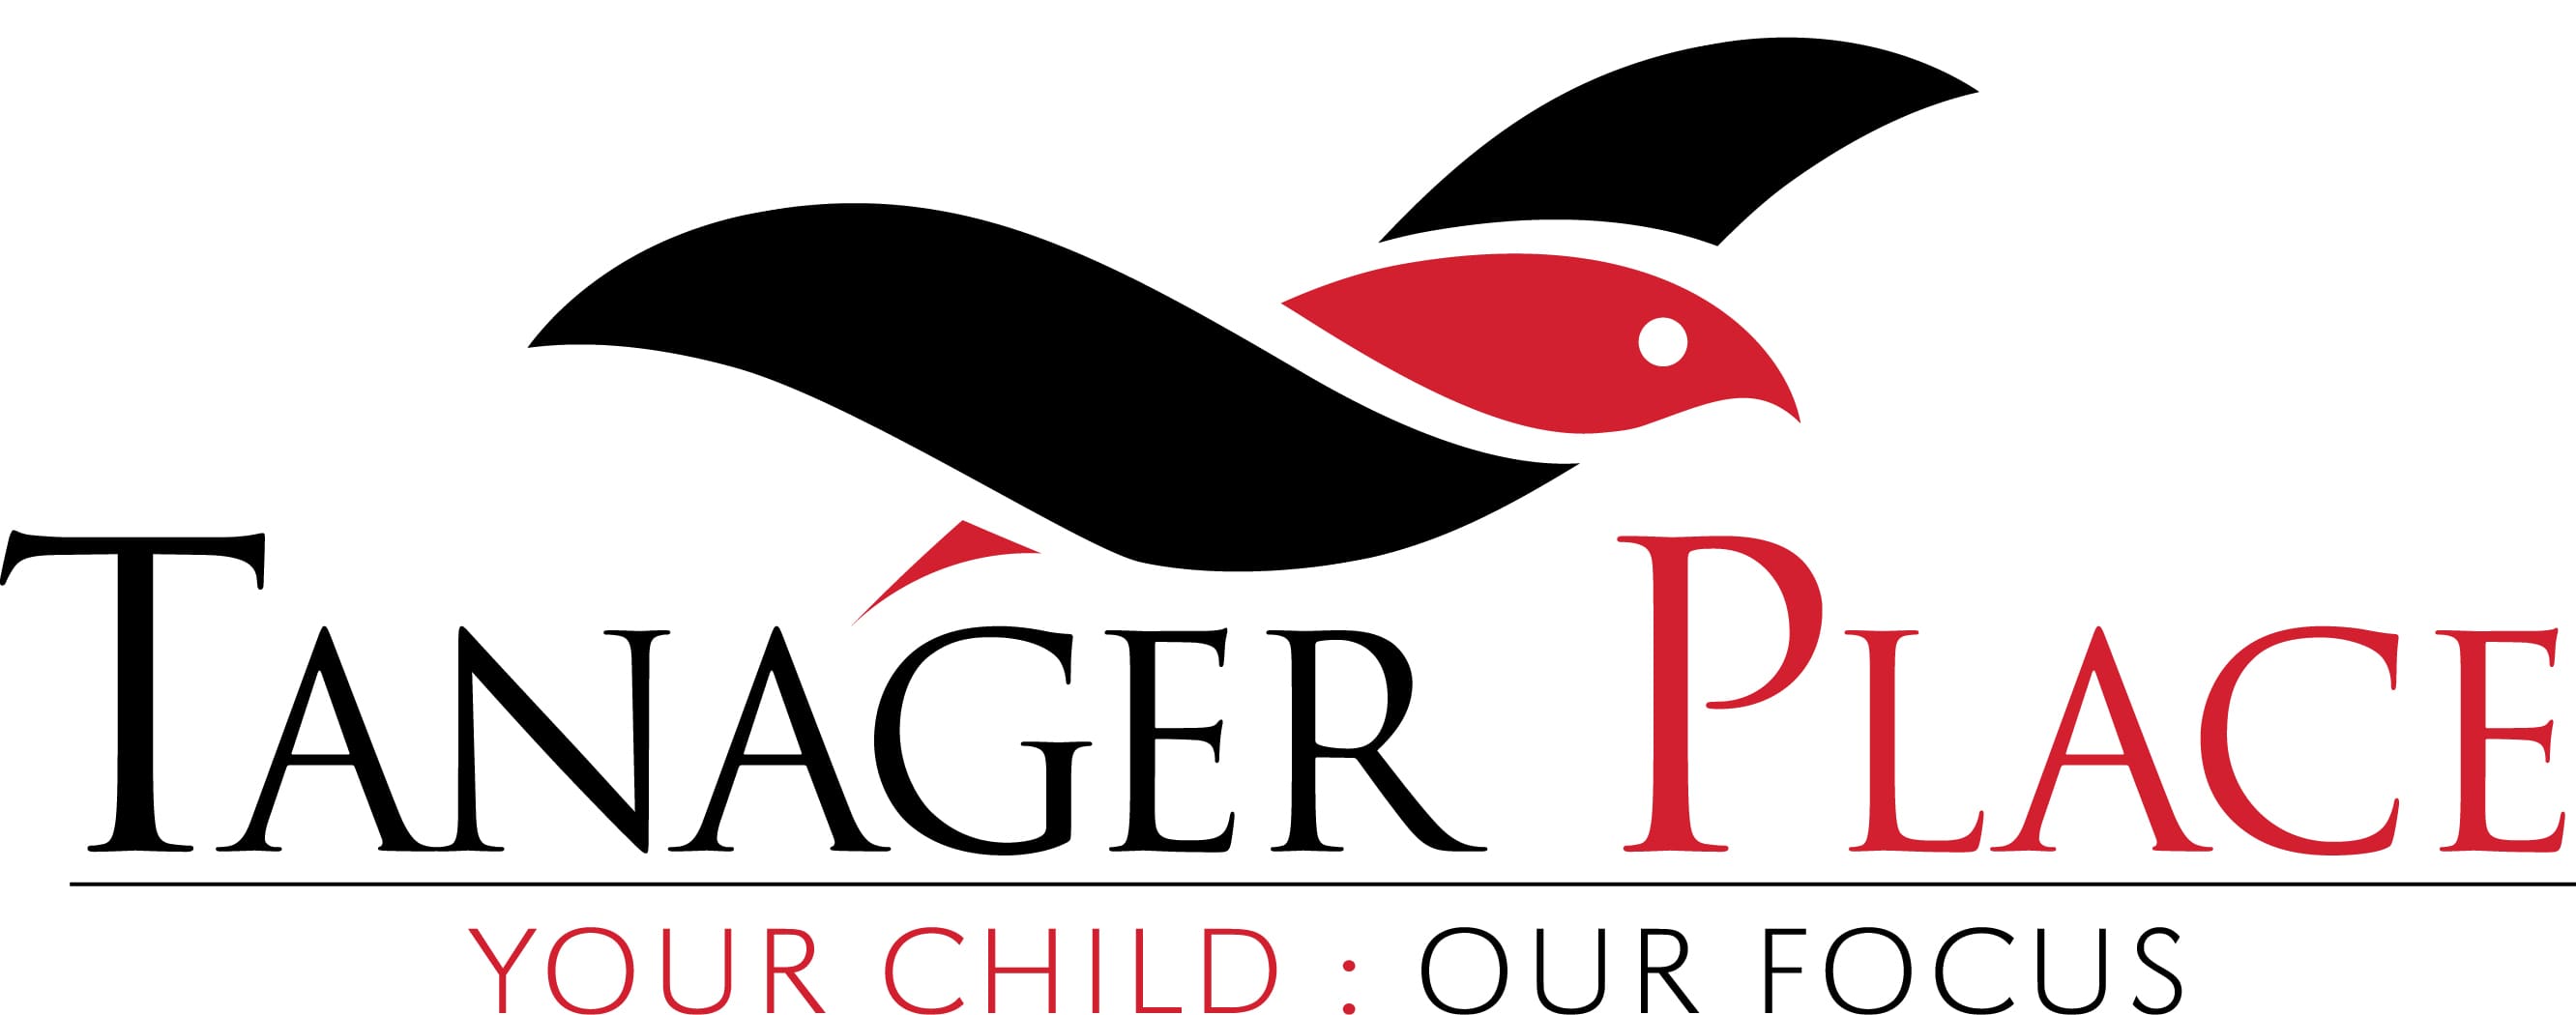 Tanager Place logo.jpg